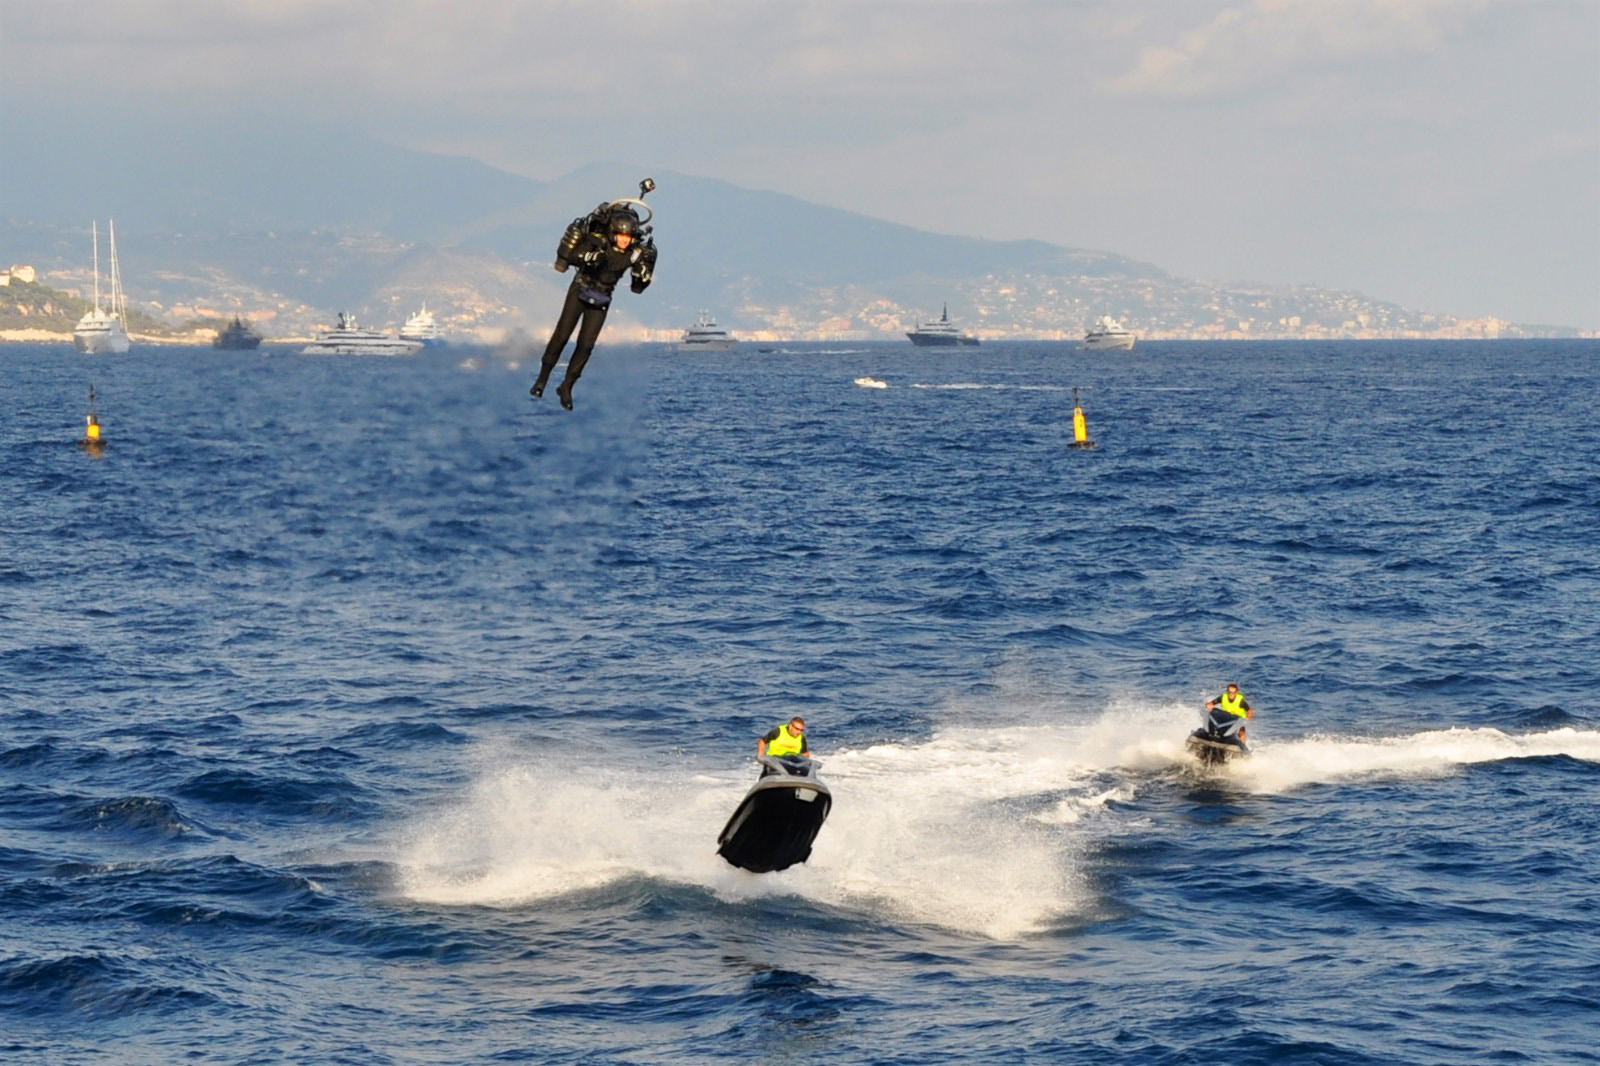 Mayman flew over jet skis in Monaco in 2016, and noted that the JB-10, if allowed to reach its maximum potential speed, could easily outpace nearly all watercraft at 100 mph or more. 